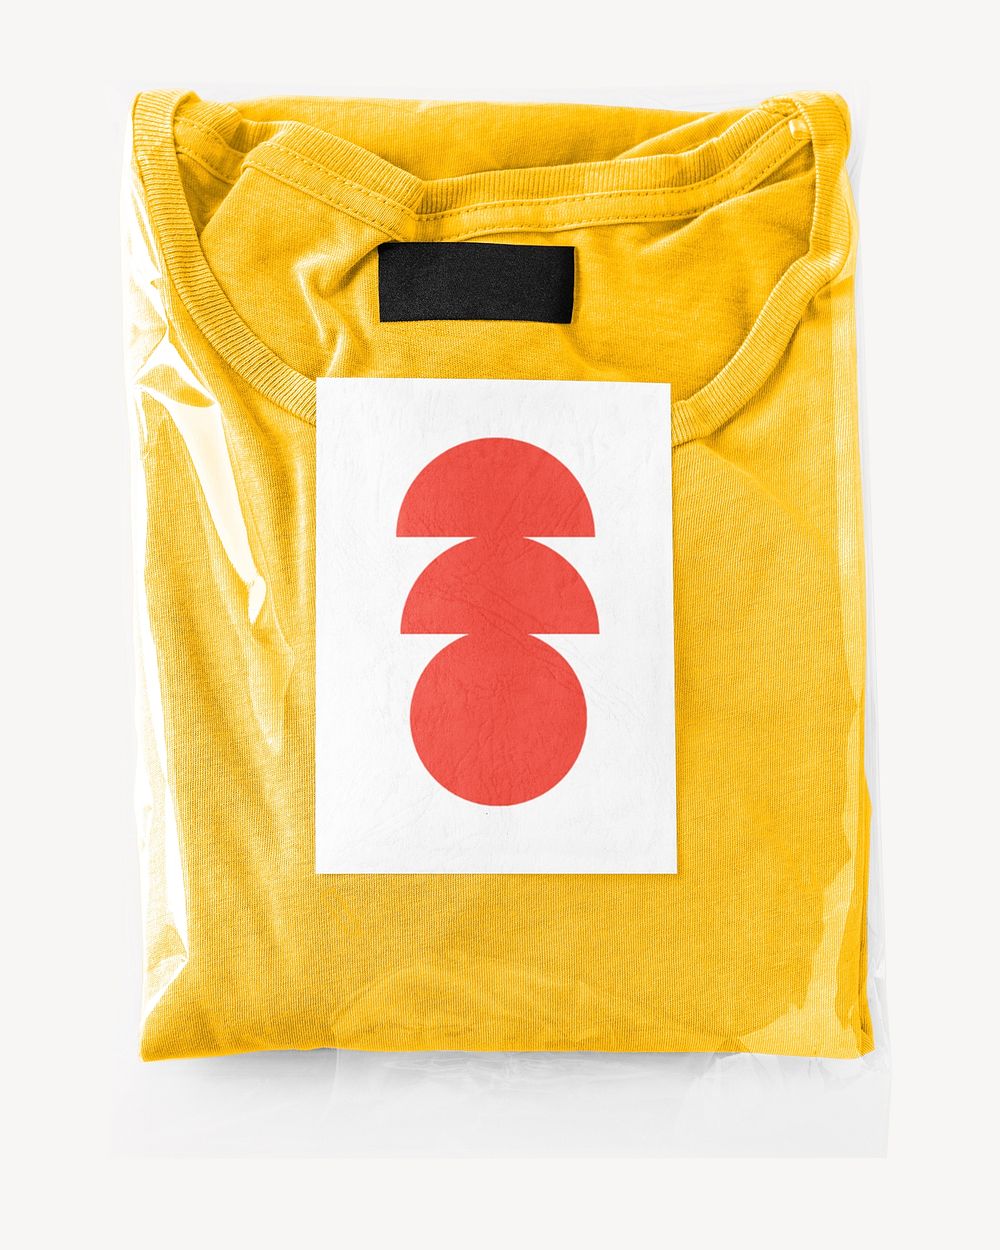 Yellow top in a plastic package 